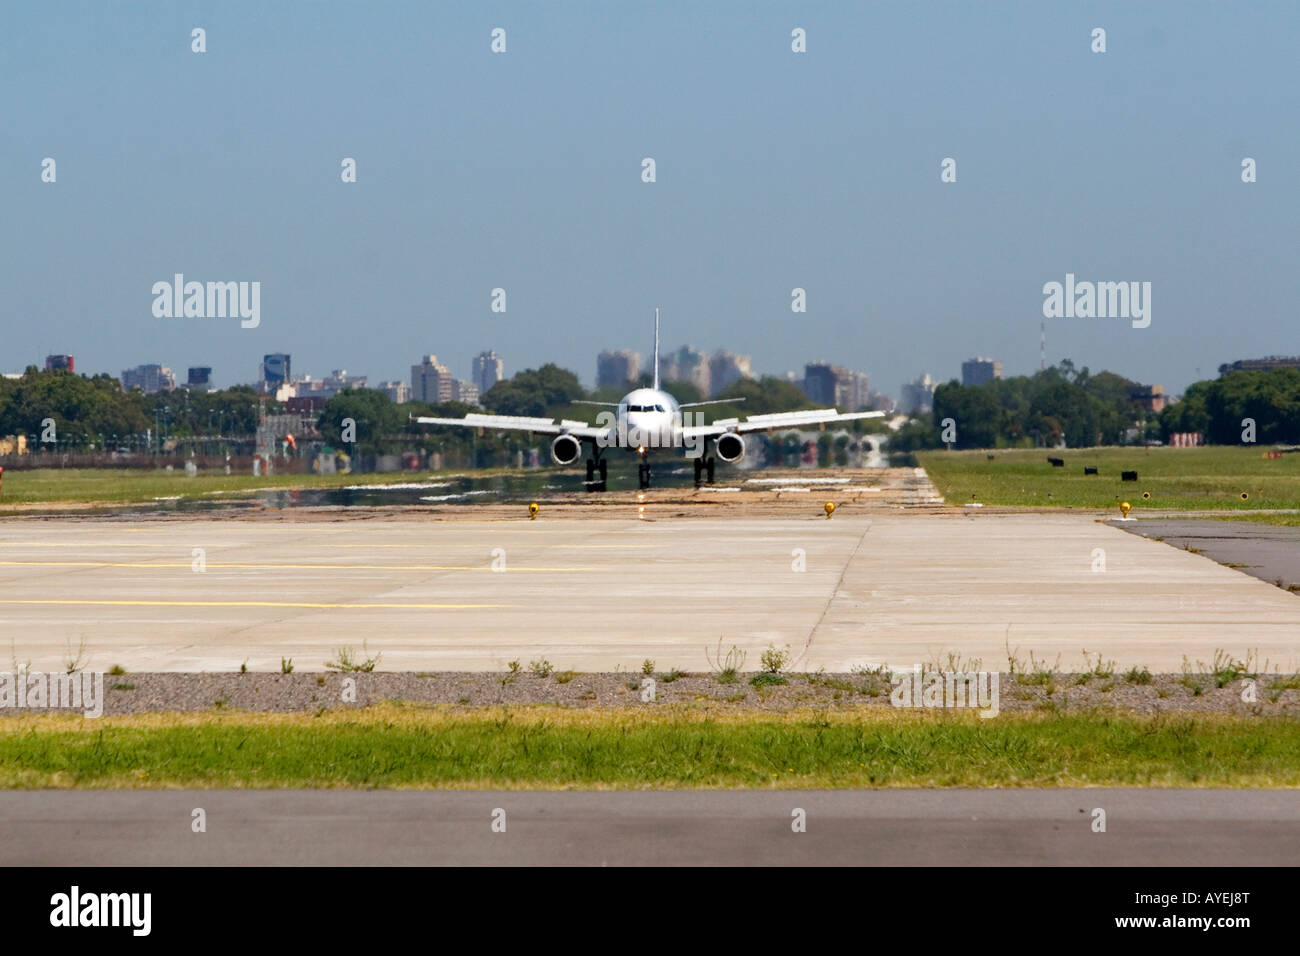 Boeing 737 airplane on the runway at Aeroparque Metropolitano Jorge Newbery in Buenos Aires Argentina Stock Photo